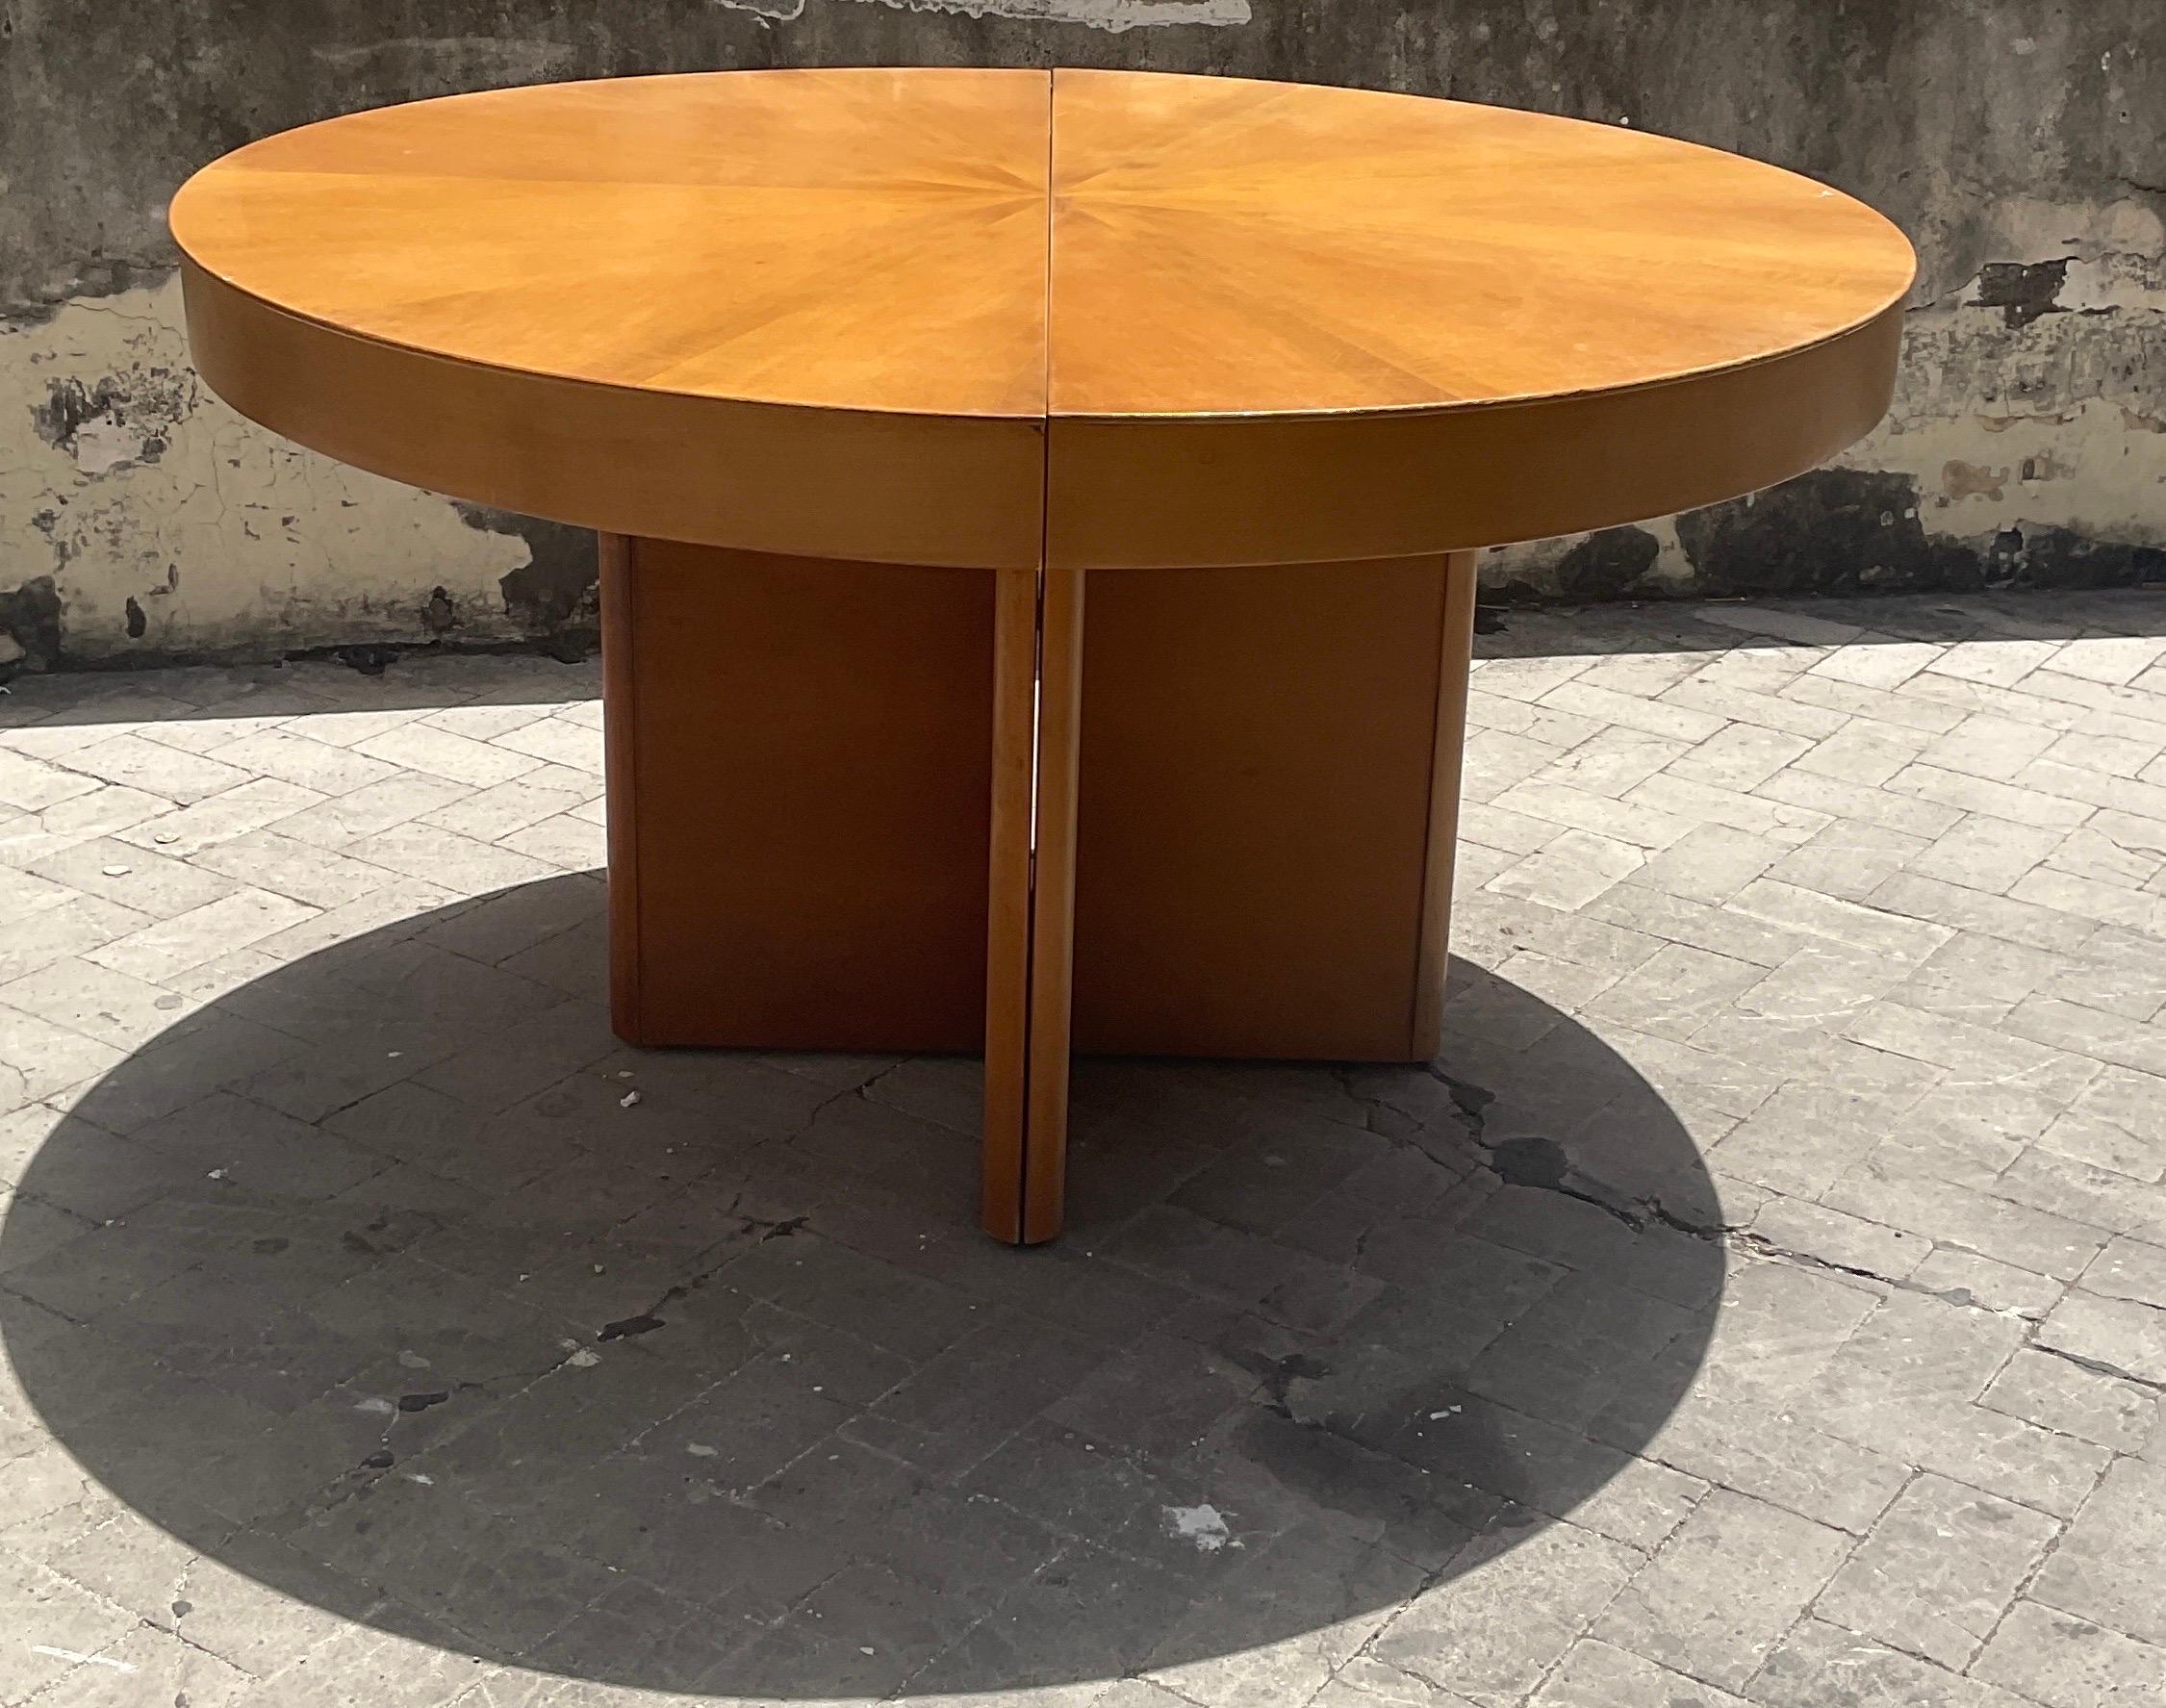 Fiorenza extendible round table in walnut by Tito Agnoli for Molteni, 70s. In good condition with small wear and tear caused by years and use. The measures of the table in extended form are 28.74 inches high, 86.22 inches wide and 51.18 inches deep.